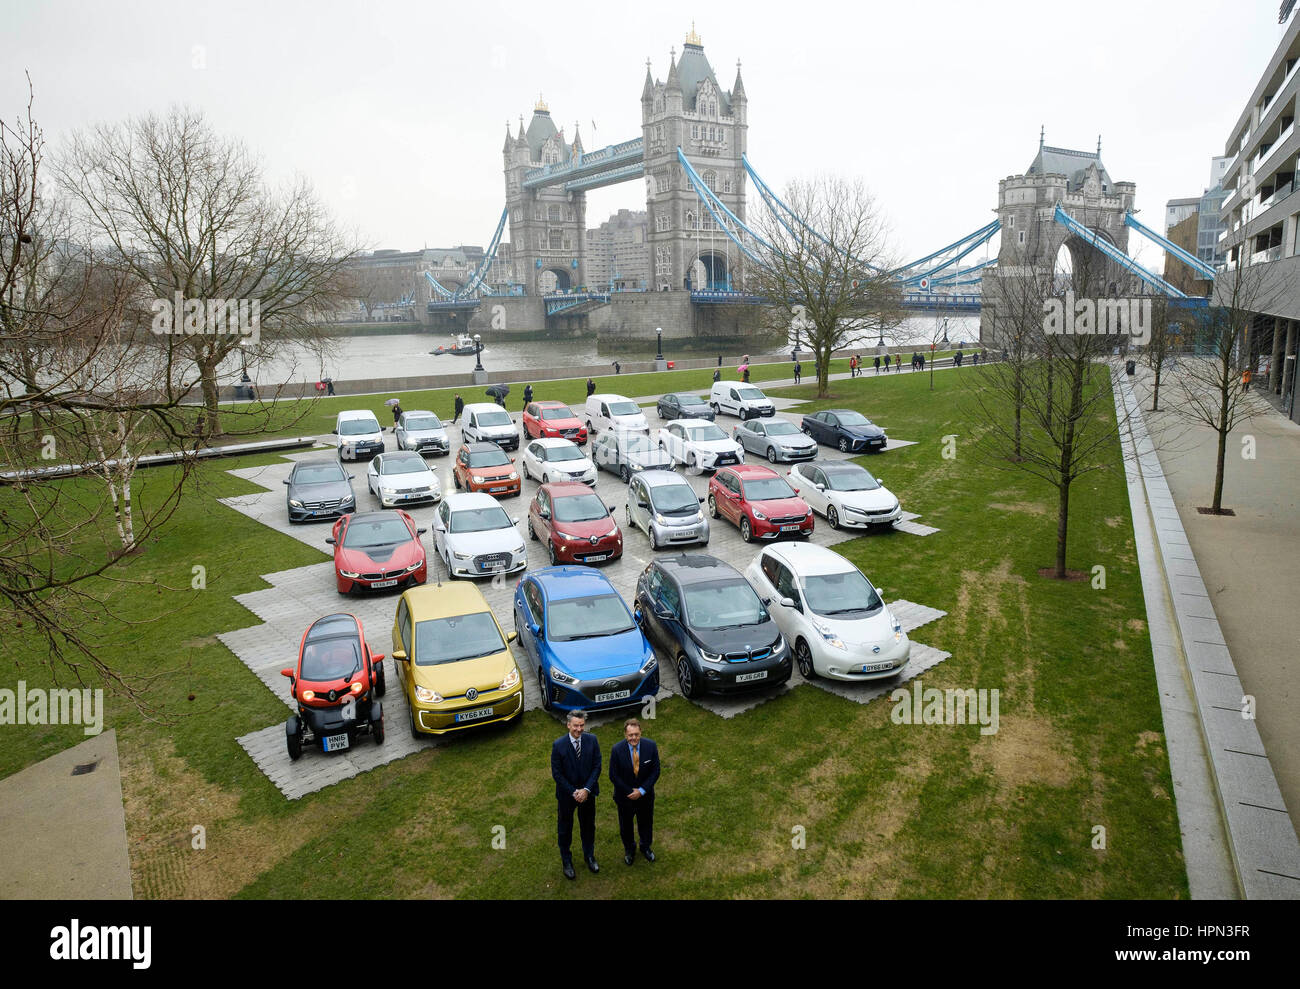 Mike Hawes, Chief Executive of The Society of Motor Manufacturers and Traders (left), and transport Minister John Hayes MP with (left to right), Renault Twizy, Volkswagen e-Up!, Hyundai IONIQ Electric, BMW i3 and Nissan LEAF, 5 of 26 Alternatively Fuelled Vehicles (AFVs) on display at Potters Fields Park in London to highlight the automotive industry aim to deliver the latest in clean air technology for towns and cities across the UK. Stock Photo